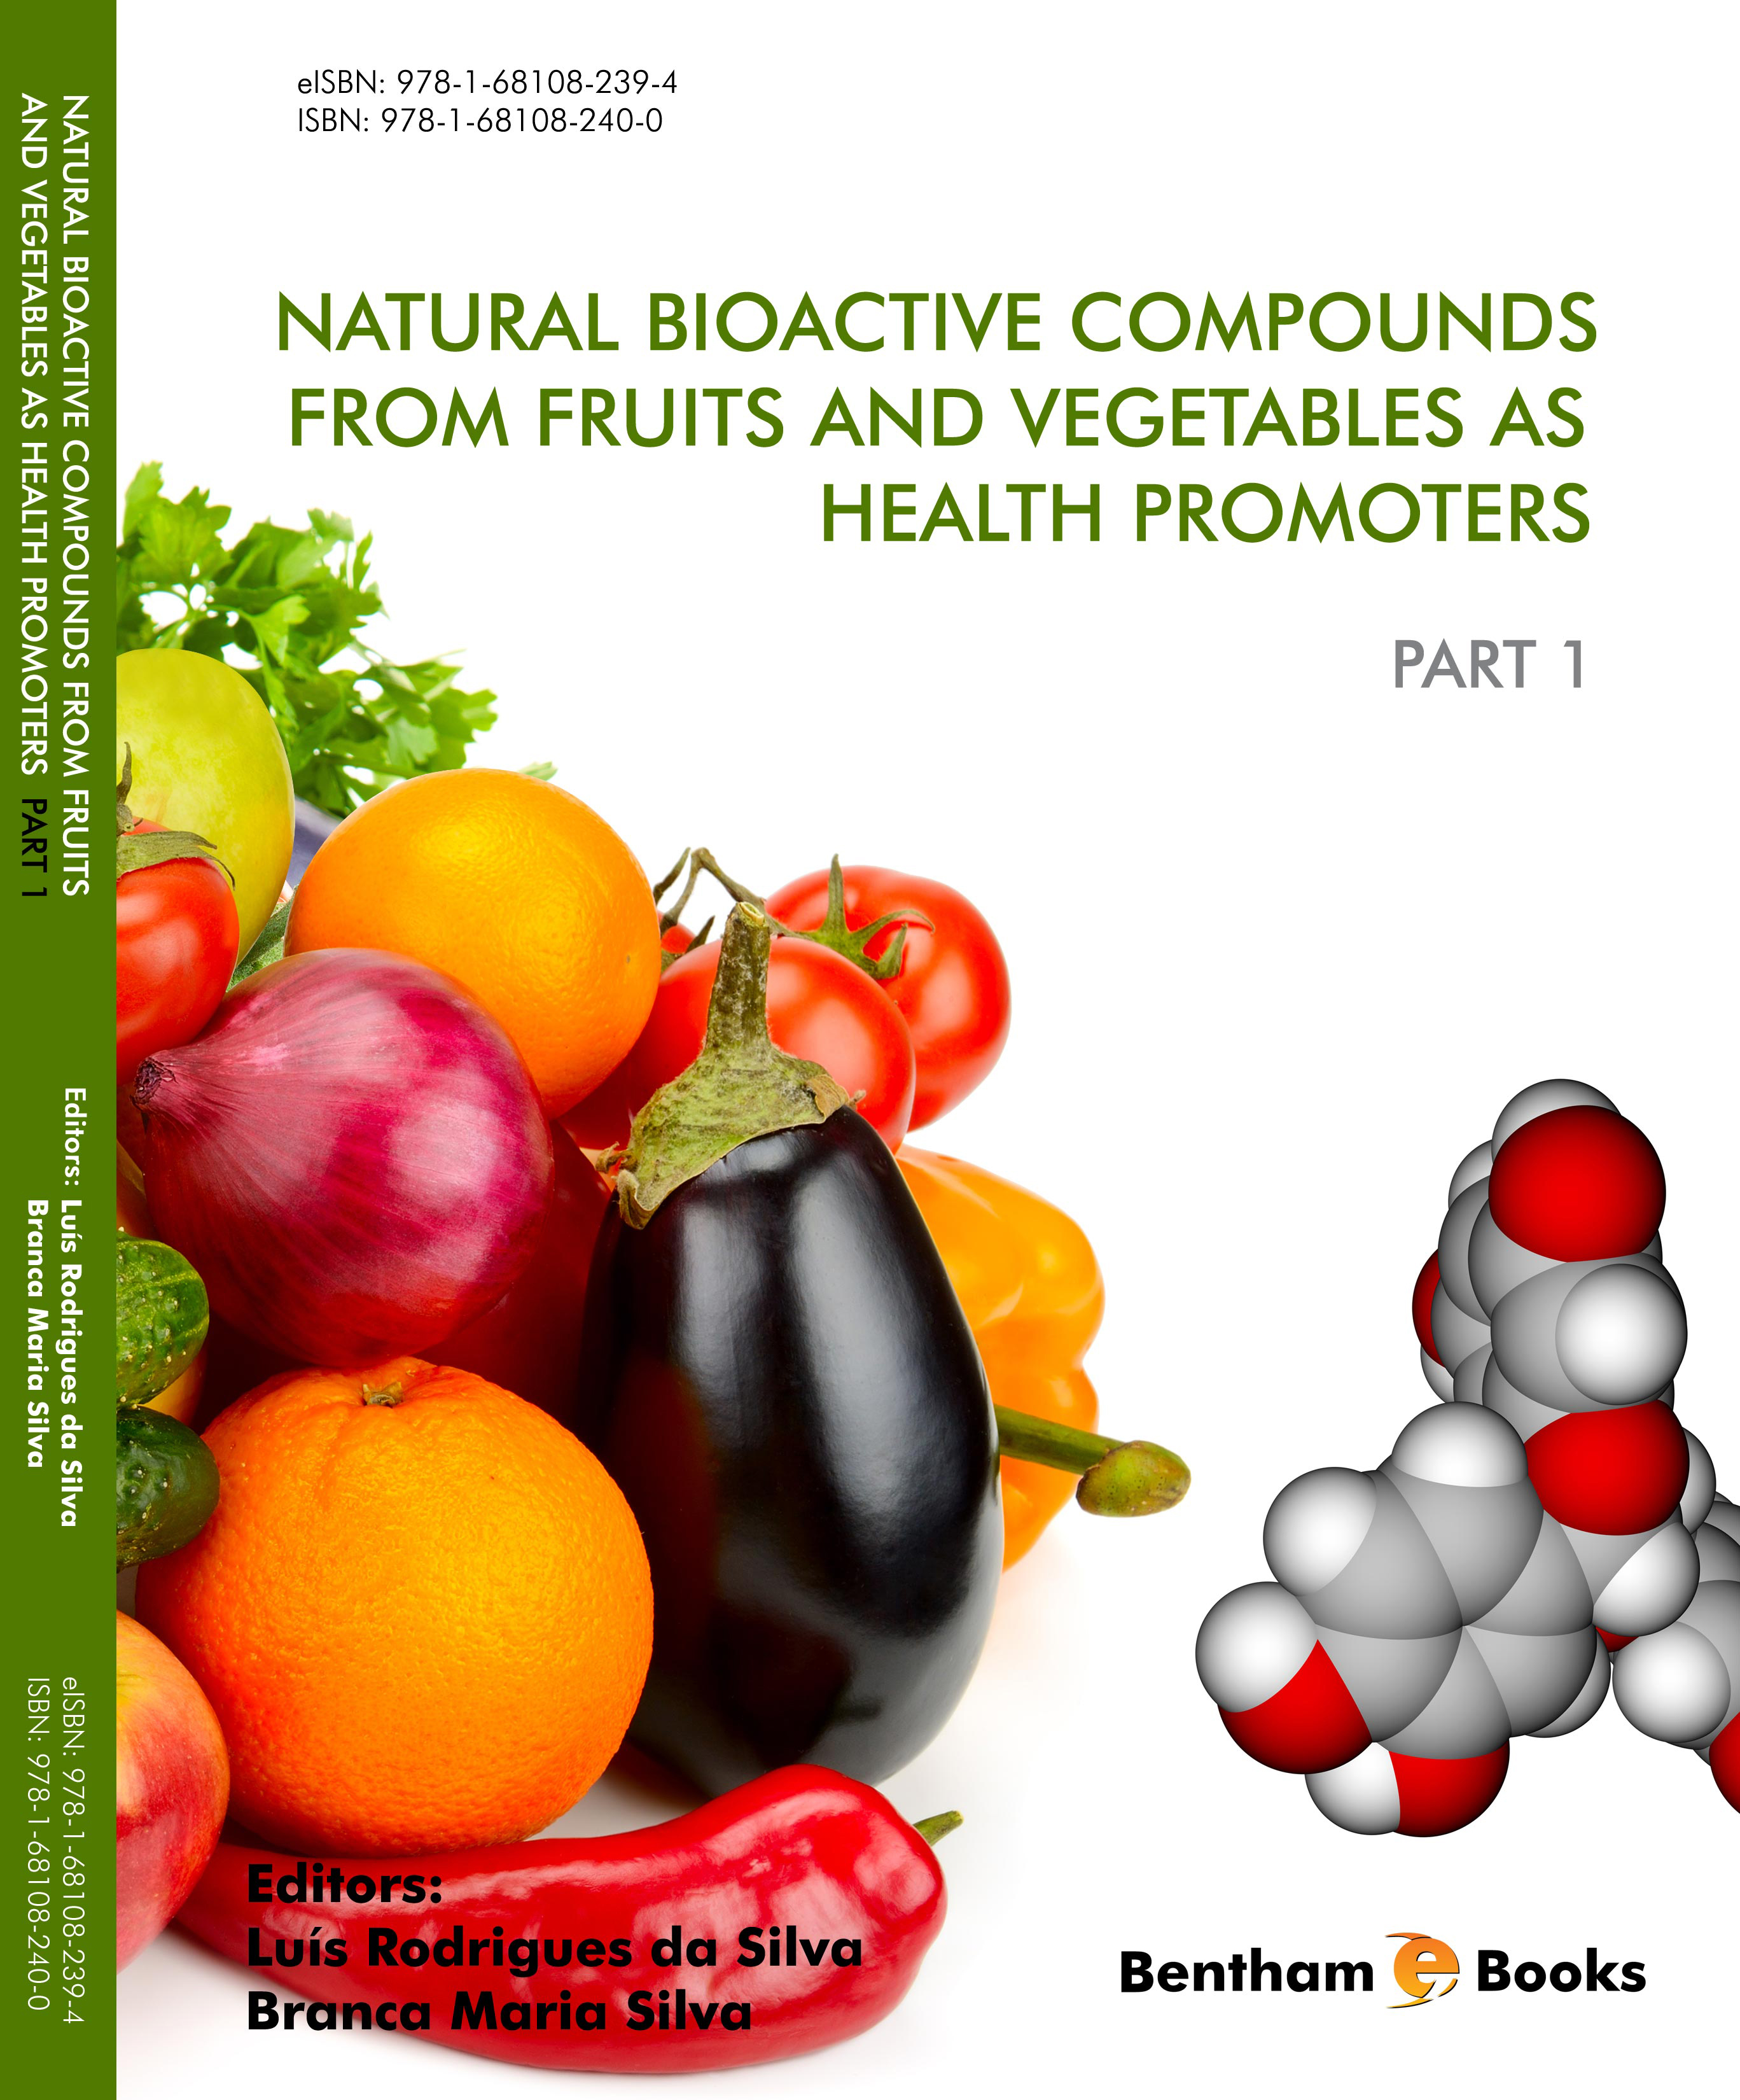 Natural Bioactive Compounds from Fruits and Vegetables as Health Promoters: Part 1